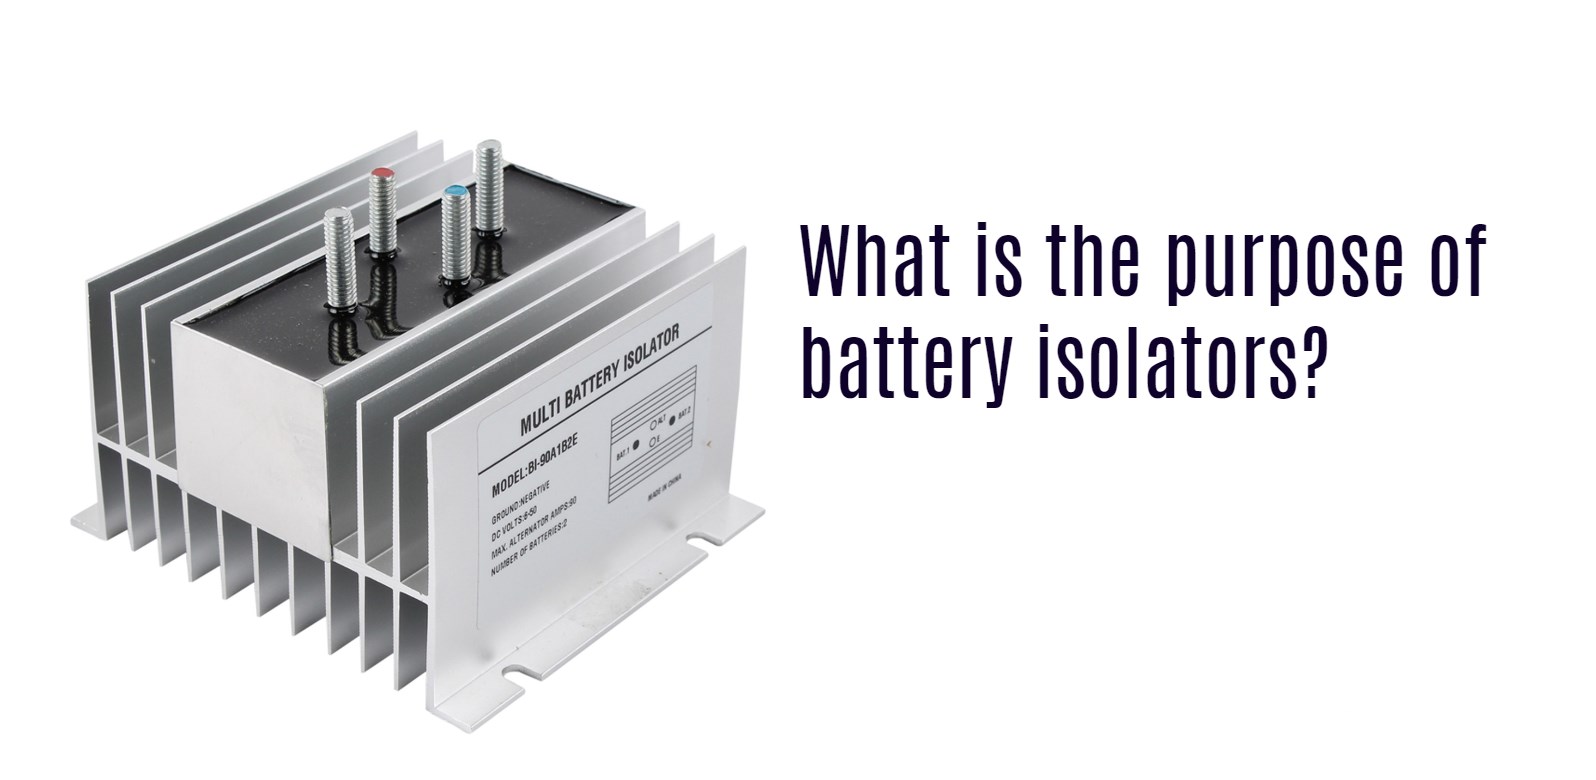 What is the purpose of battery isolators?